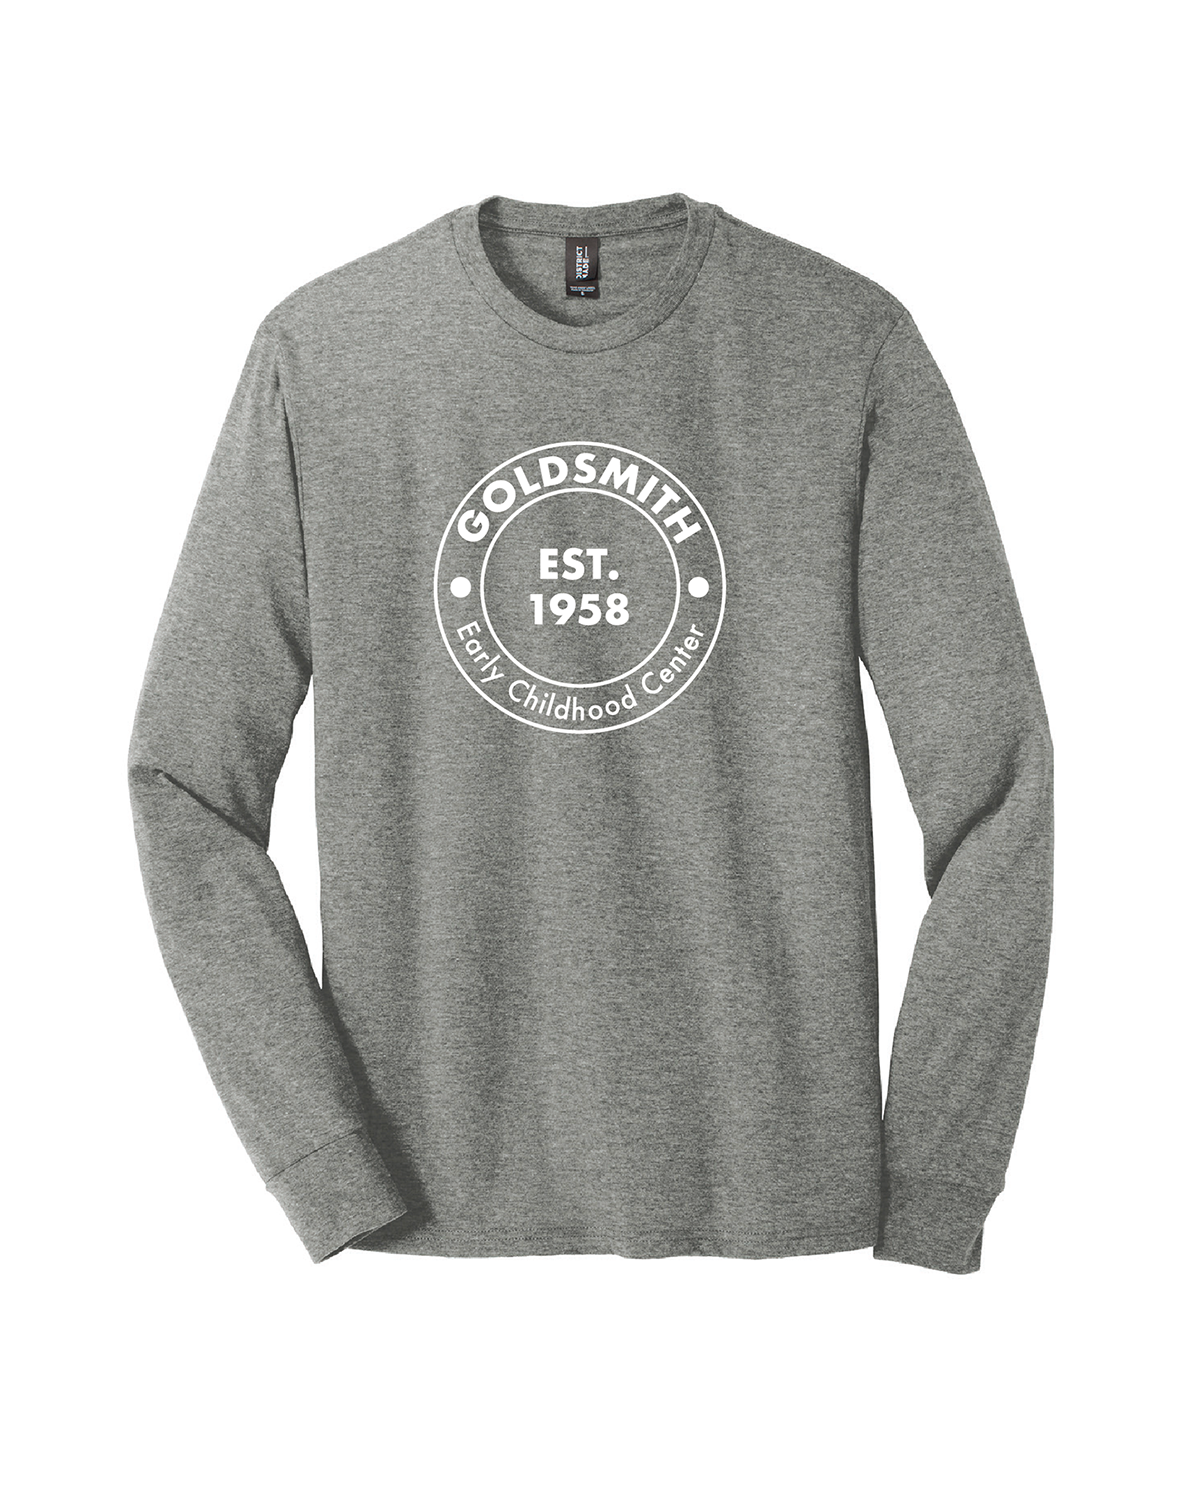 Adult Tri-Blend Long Sleeved with Round Logo